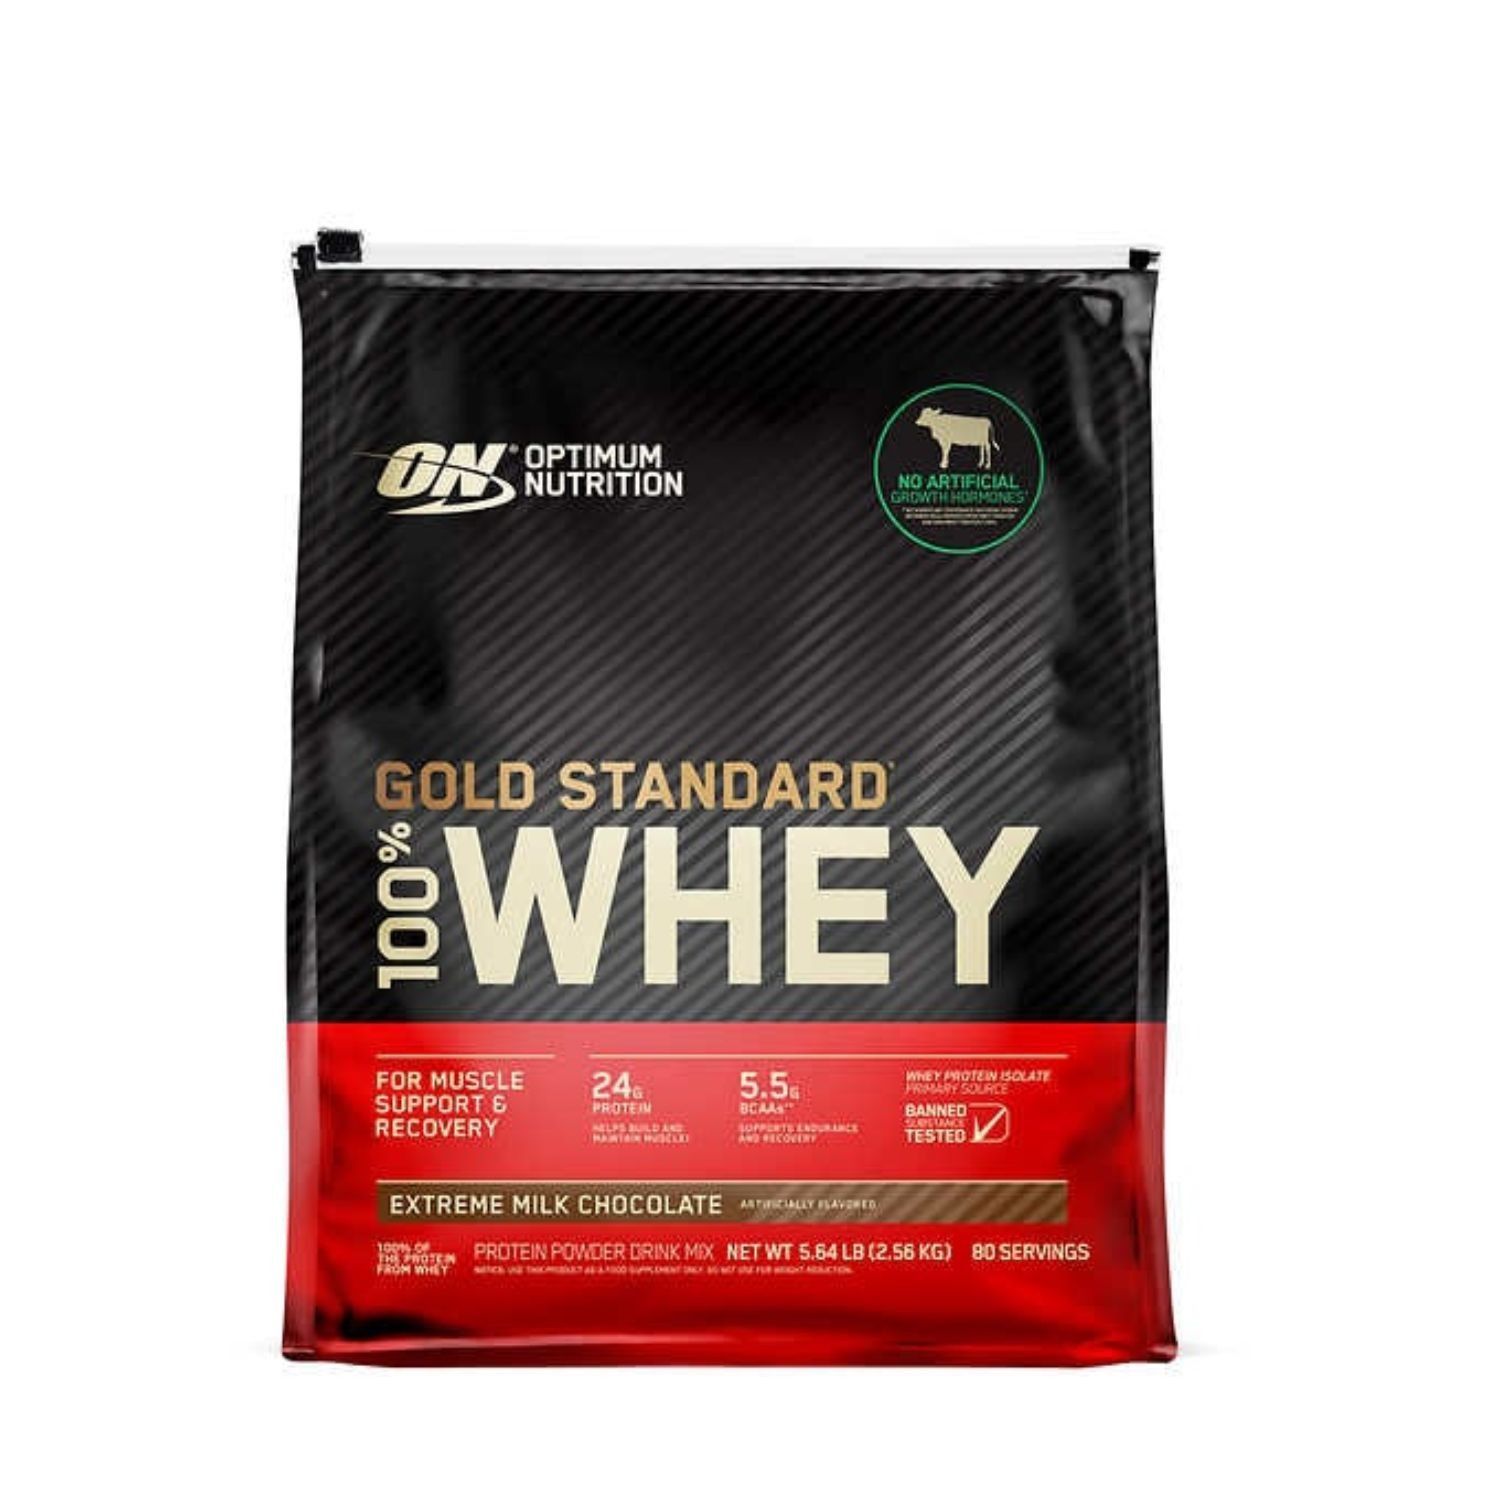  Bột bổ sung protein ON Optimum Nutrition whey chocolate gold 2.56kg 